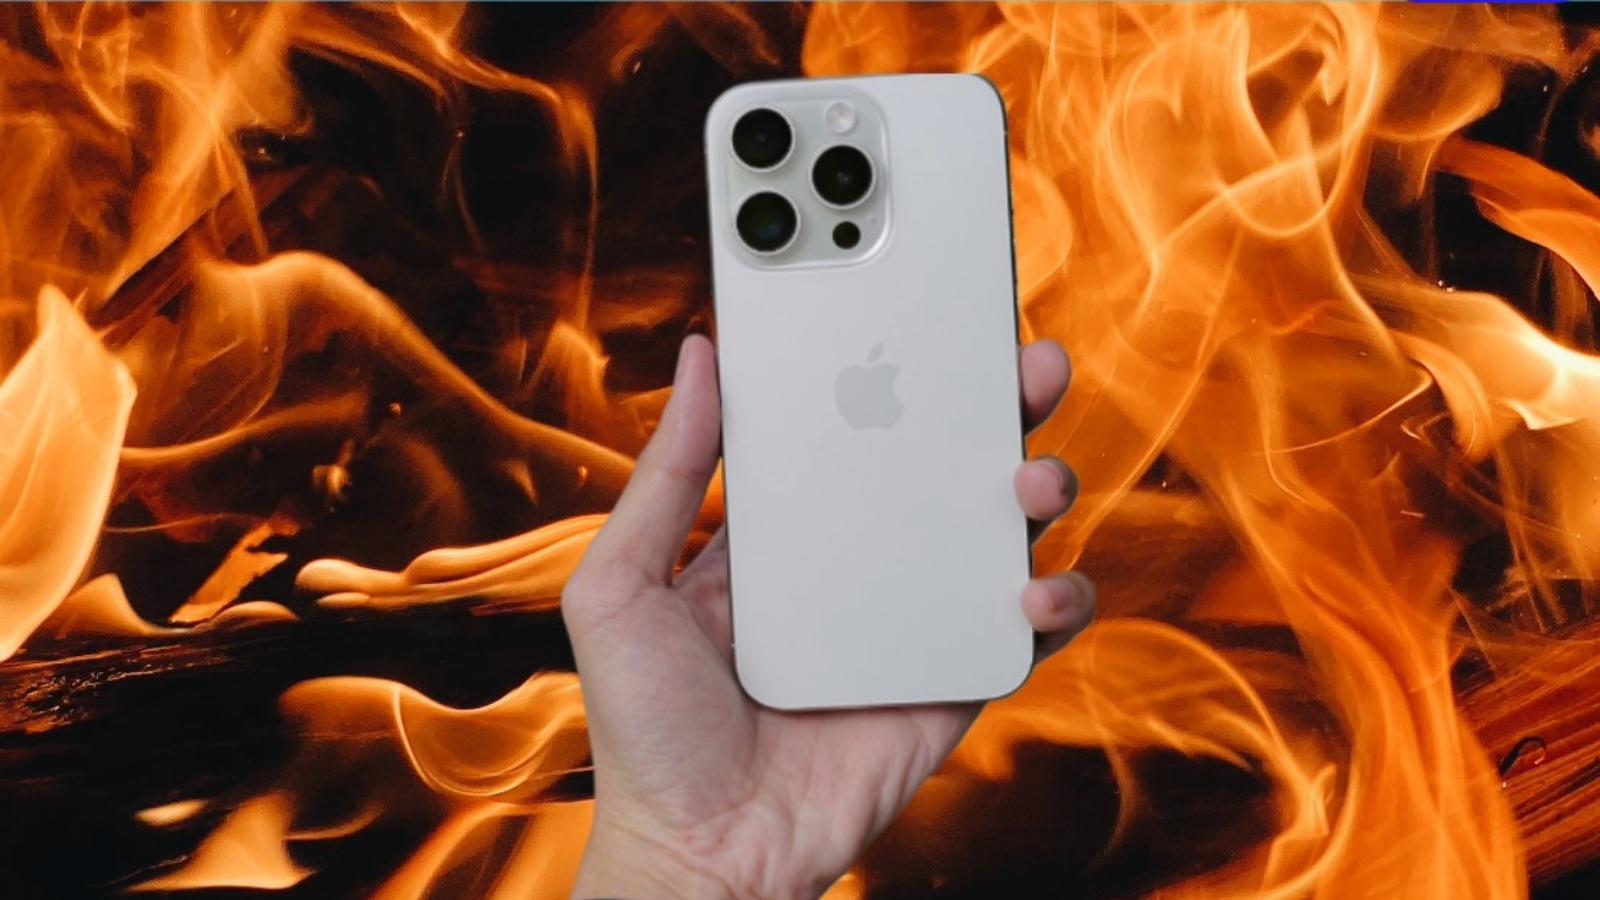 iPhone against a fiery background